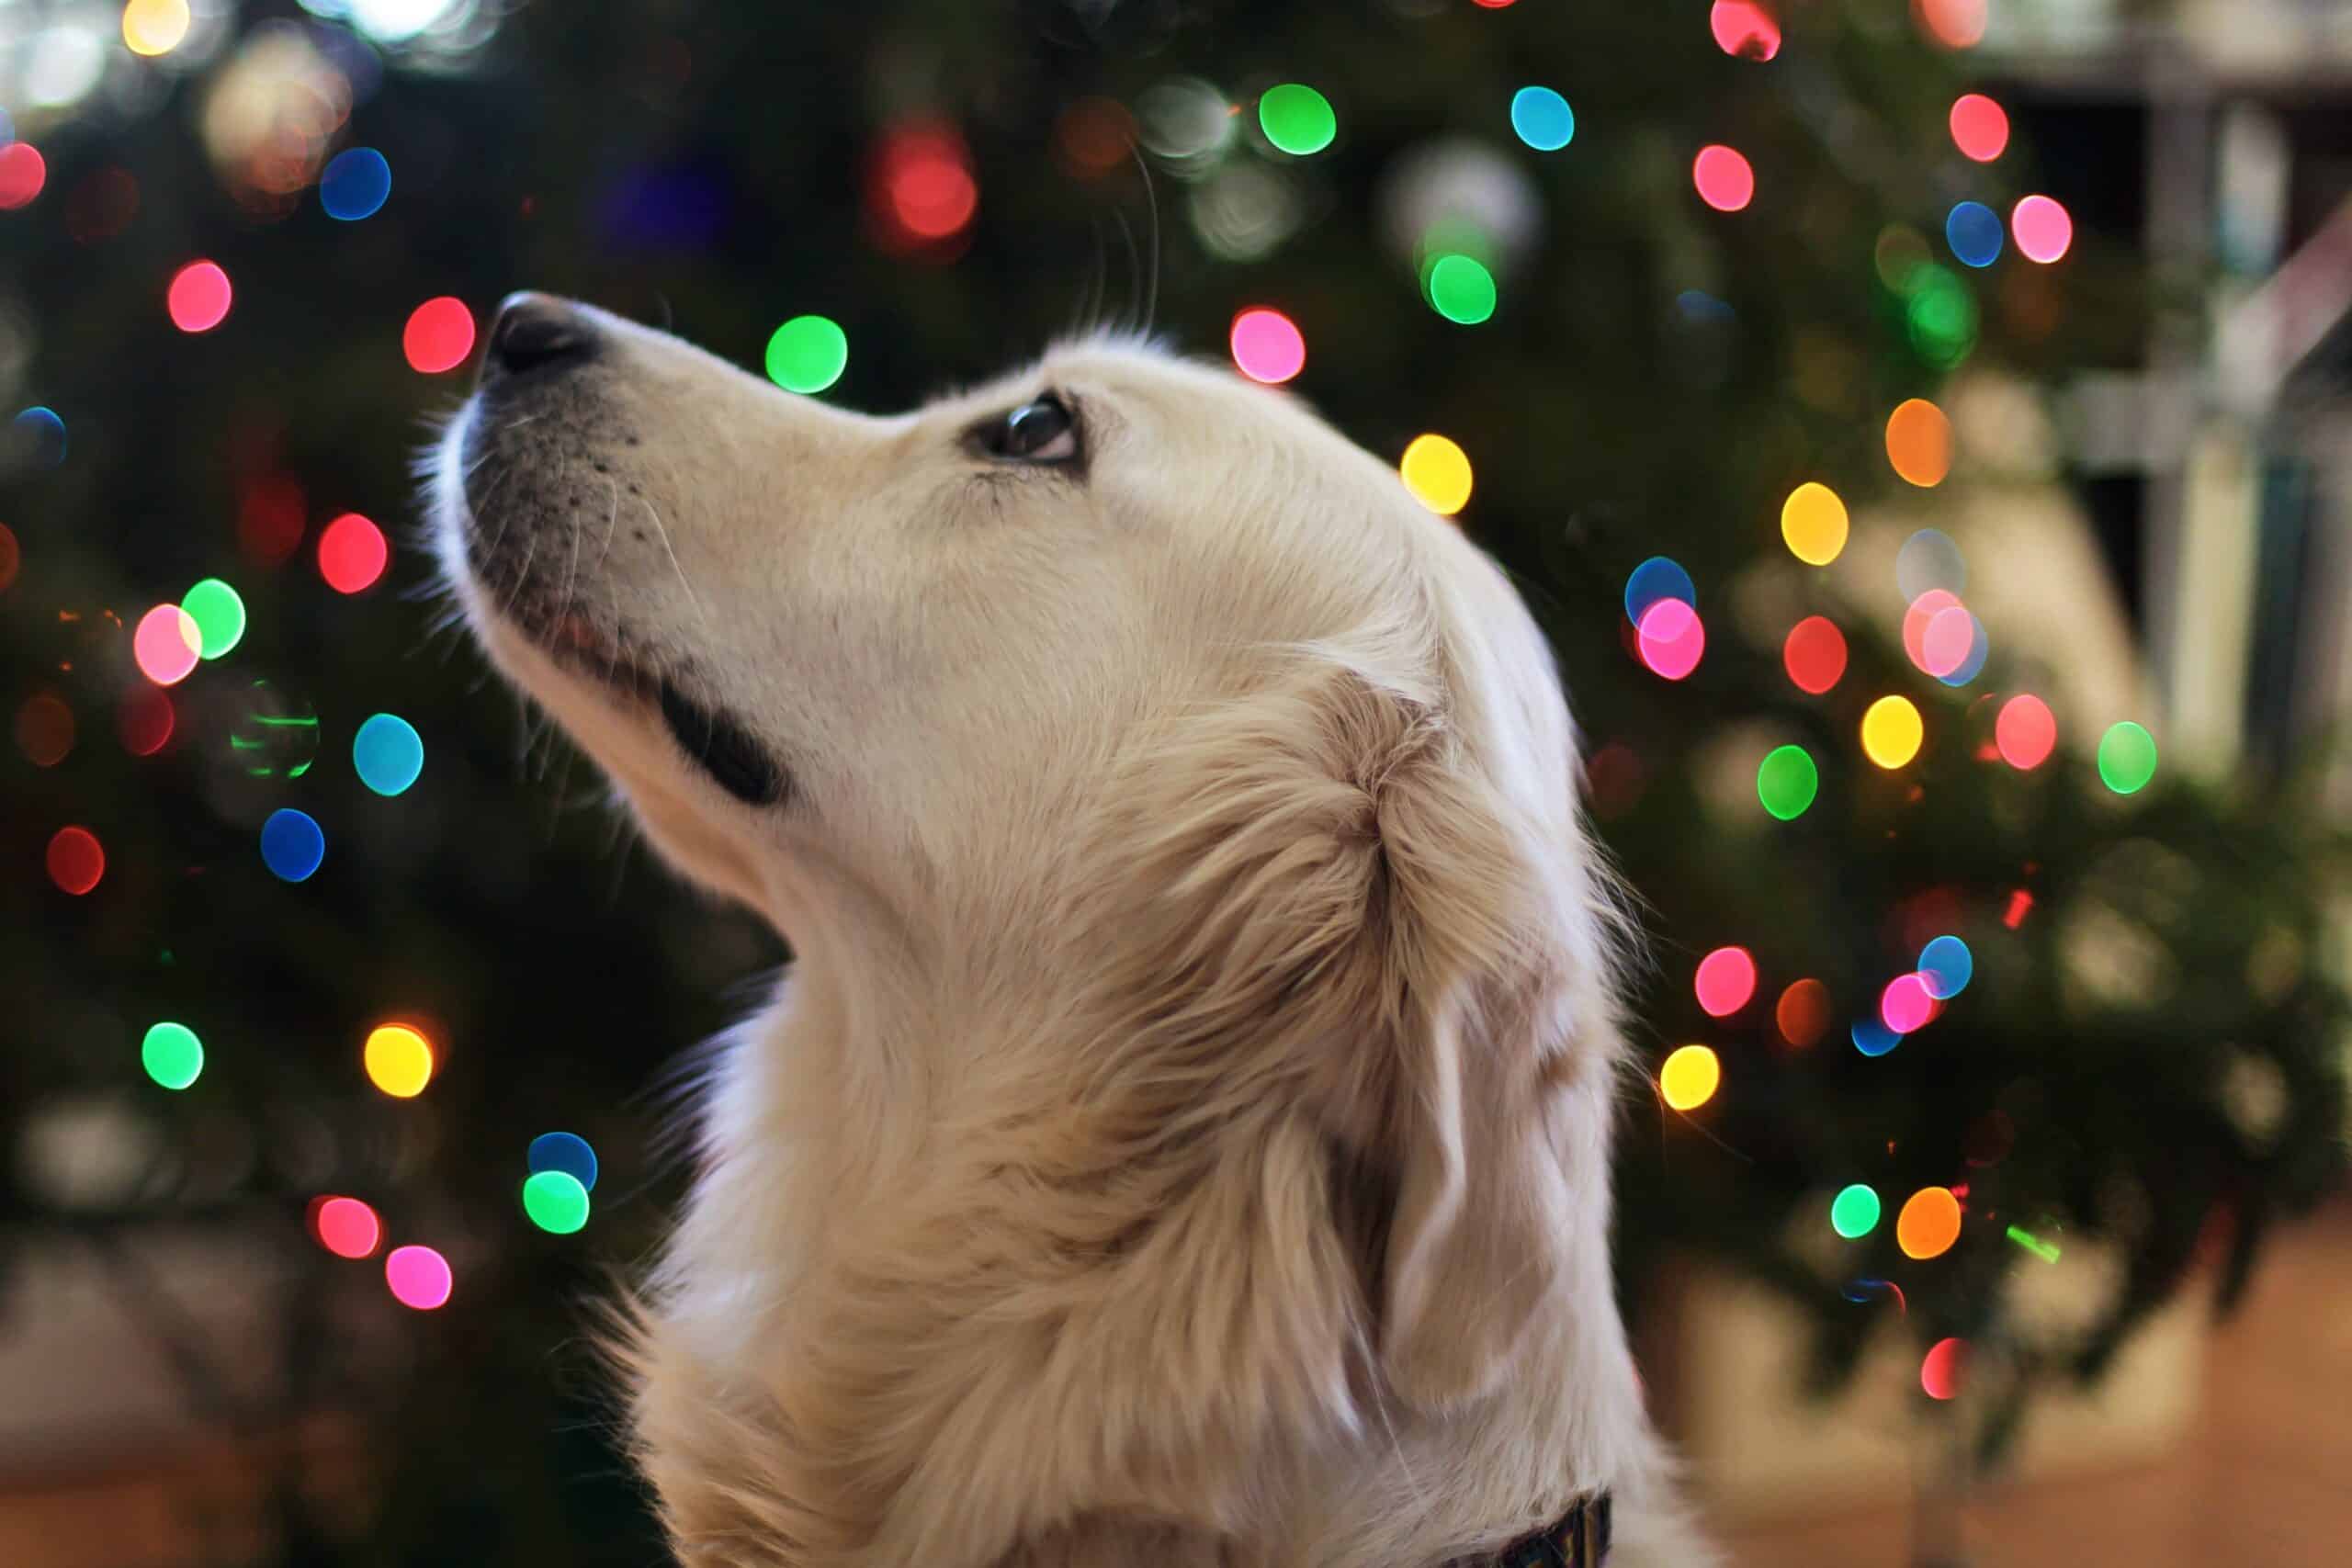 pets for christmas can have pros and cons